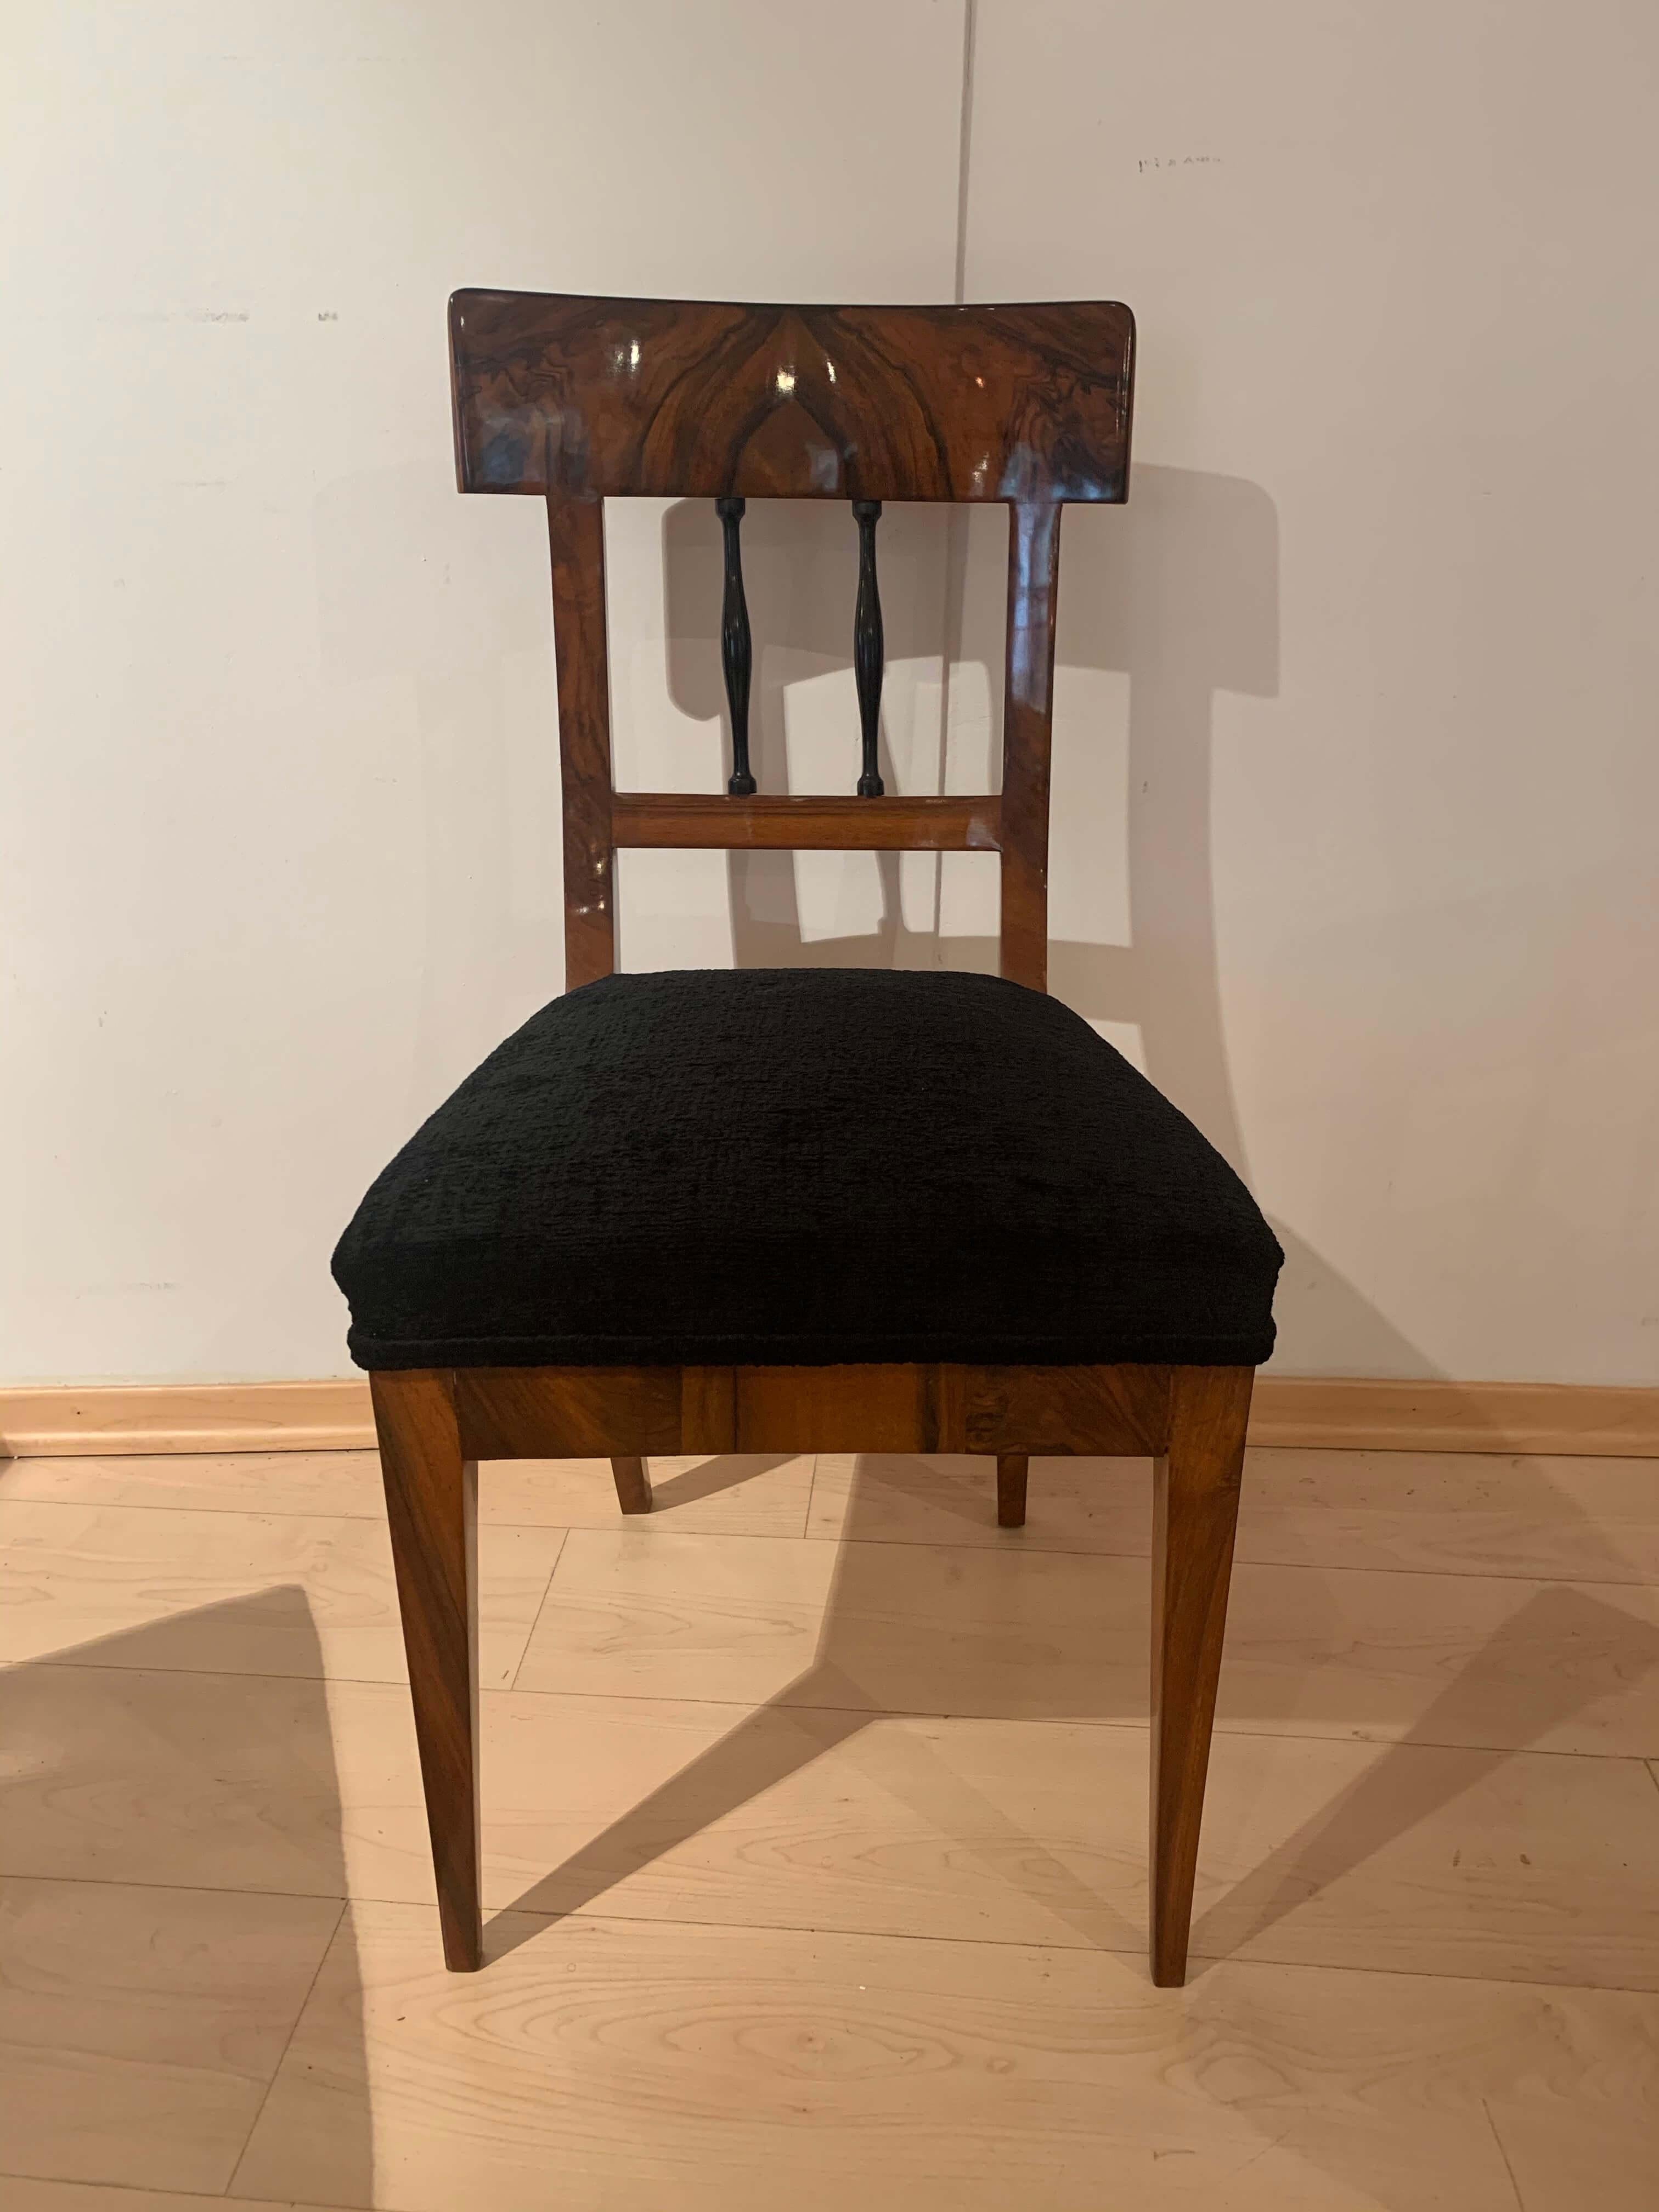 Restored original early Biedermeier chair in Walnut veneer and black velvet from South Germany around 1820.
Wonderful book-matched vertically and horizontally veneered walnut, hand-polished with shellac. Curved back plate and two ebonized convex